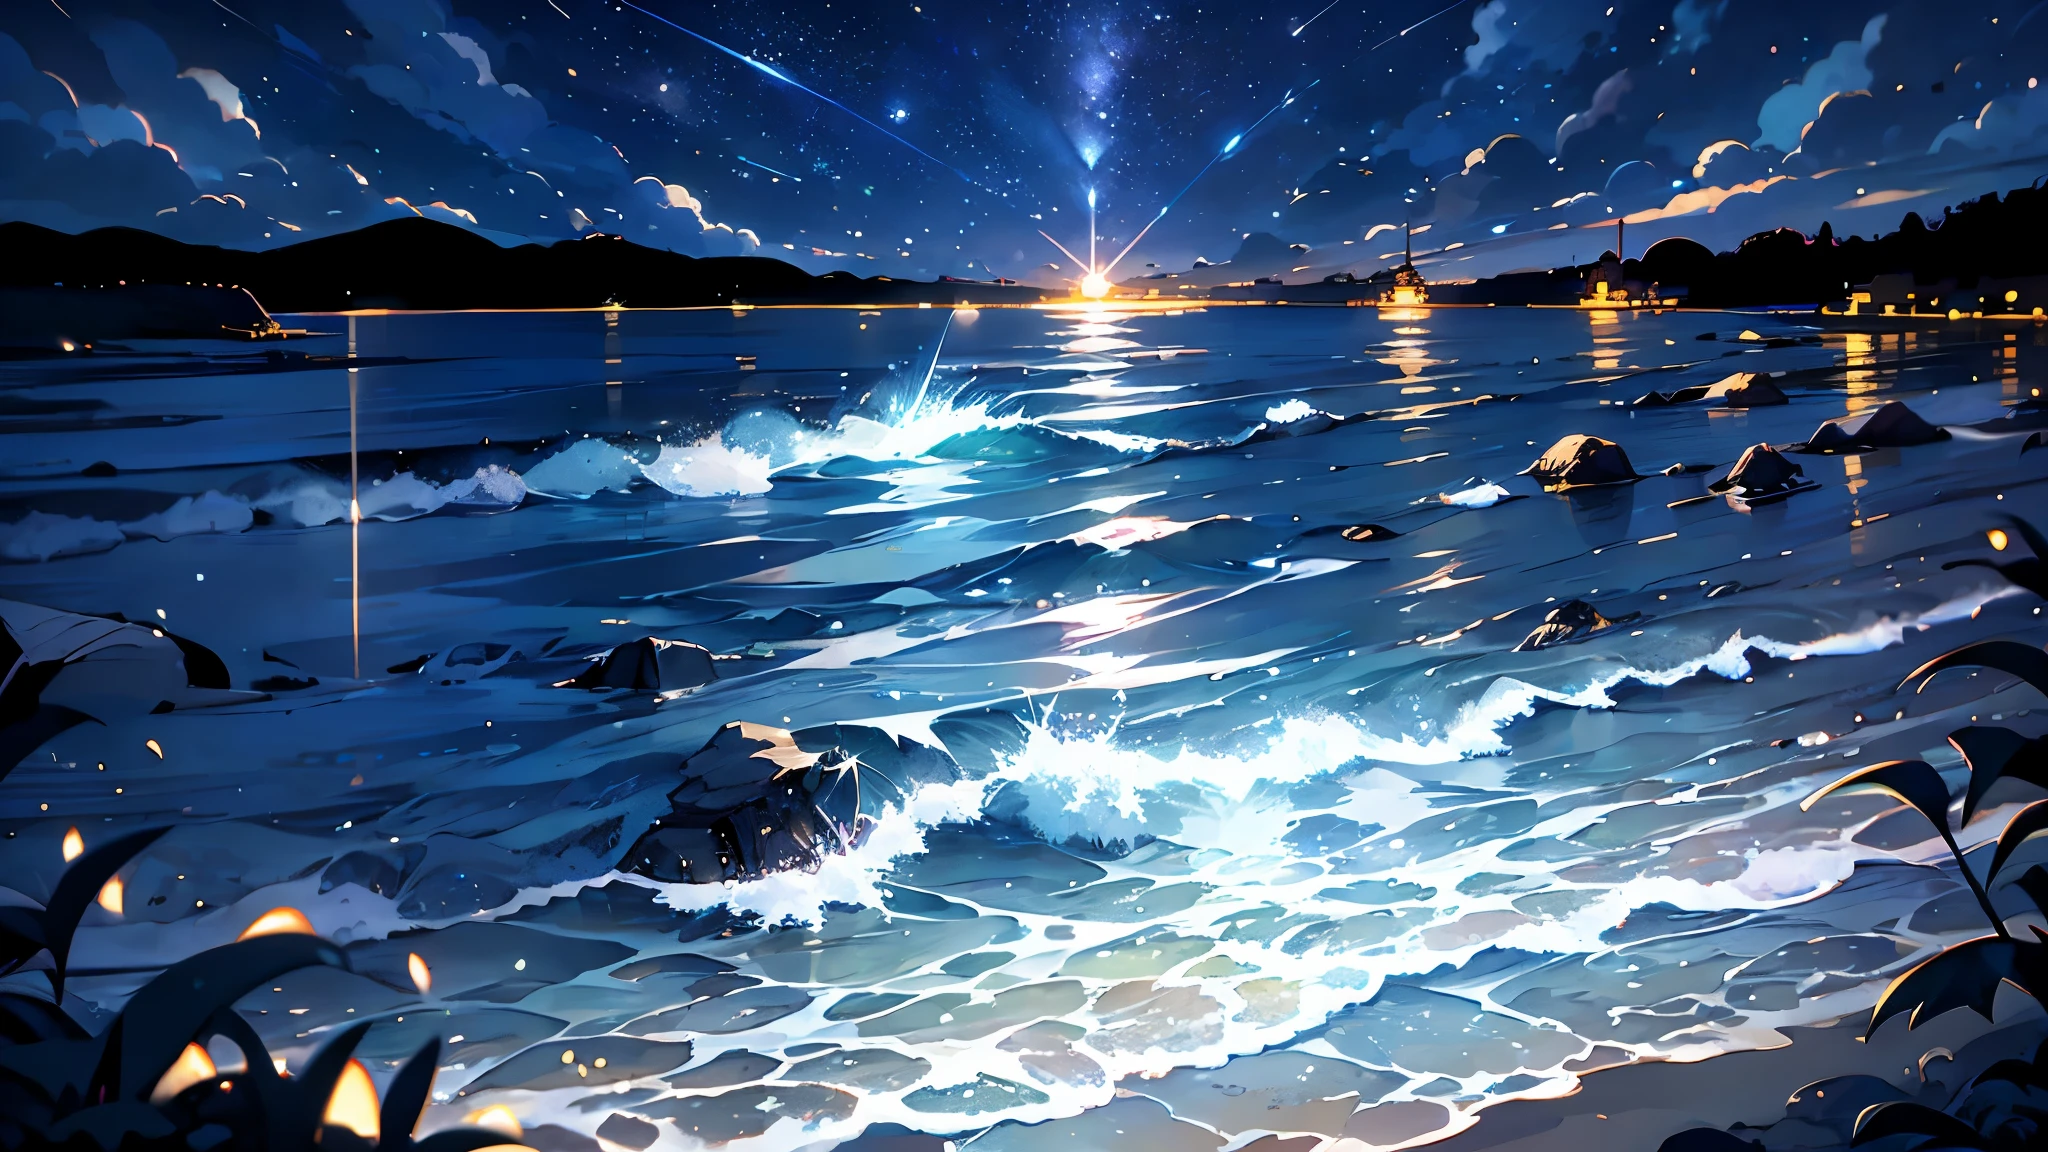 beautiful anime scenery,seaside,full of stars,1 girl,砂浜の近くに立one少女,Gaze at the stars,a little rocky area,light wind,France, big shining star３one,night, shooting star,moonlight,water surface of the moon,hand drawn illustration
